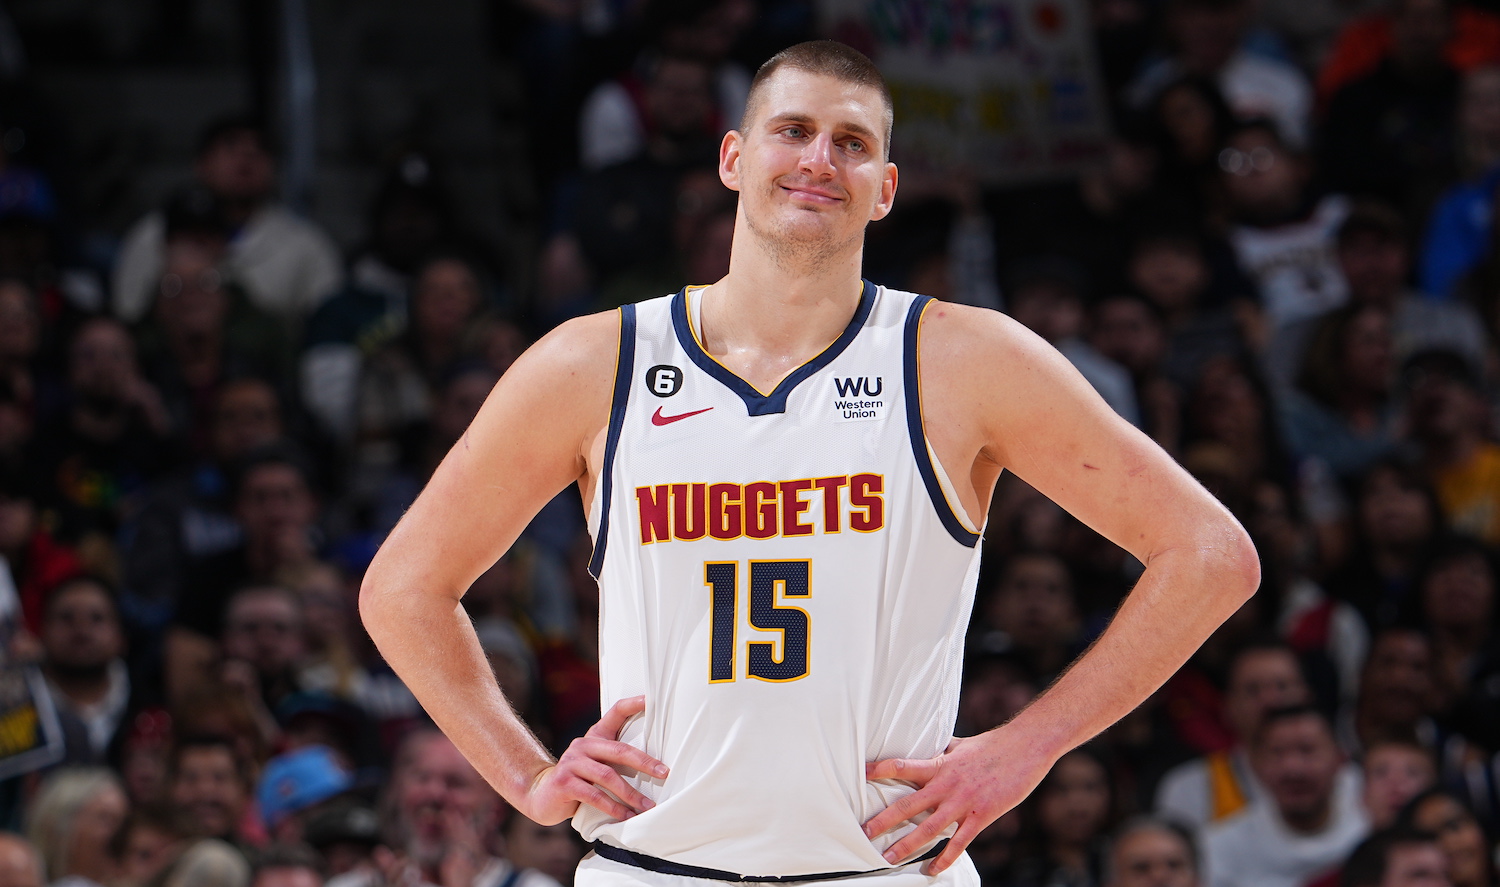 DENVER, CO - DECEMBER 10: Nikola Jokic #15 of the Denver Nuggets smiles during the game against the Utah Jazz on December 10, 2022 at the Ball Arena in Denver, Colorado. NOTE TO USER: User expressly acknowledges and agrees that, by downloading and/or using this Photograph, user is consenting to the terms and conditions of the Getty Images License Agreement. Mandatory Copyright Notice: Copyright 2022 NBAE (Photo by Bart Young/NBAE via Getty Images)